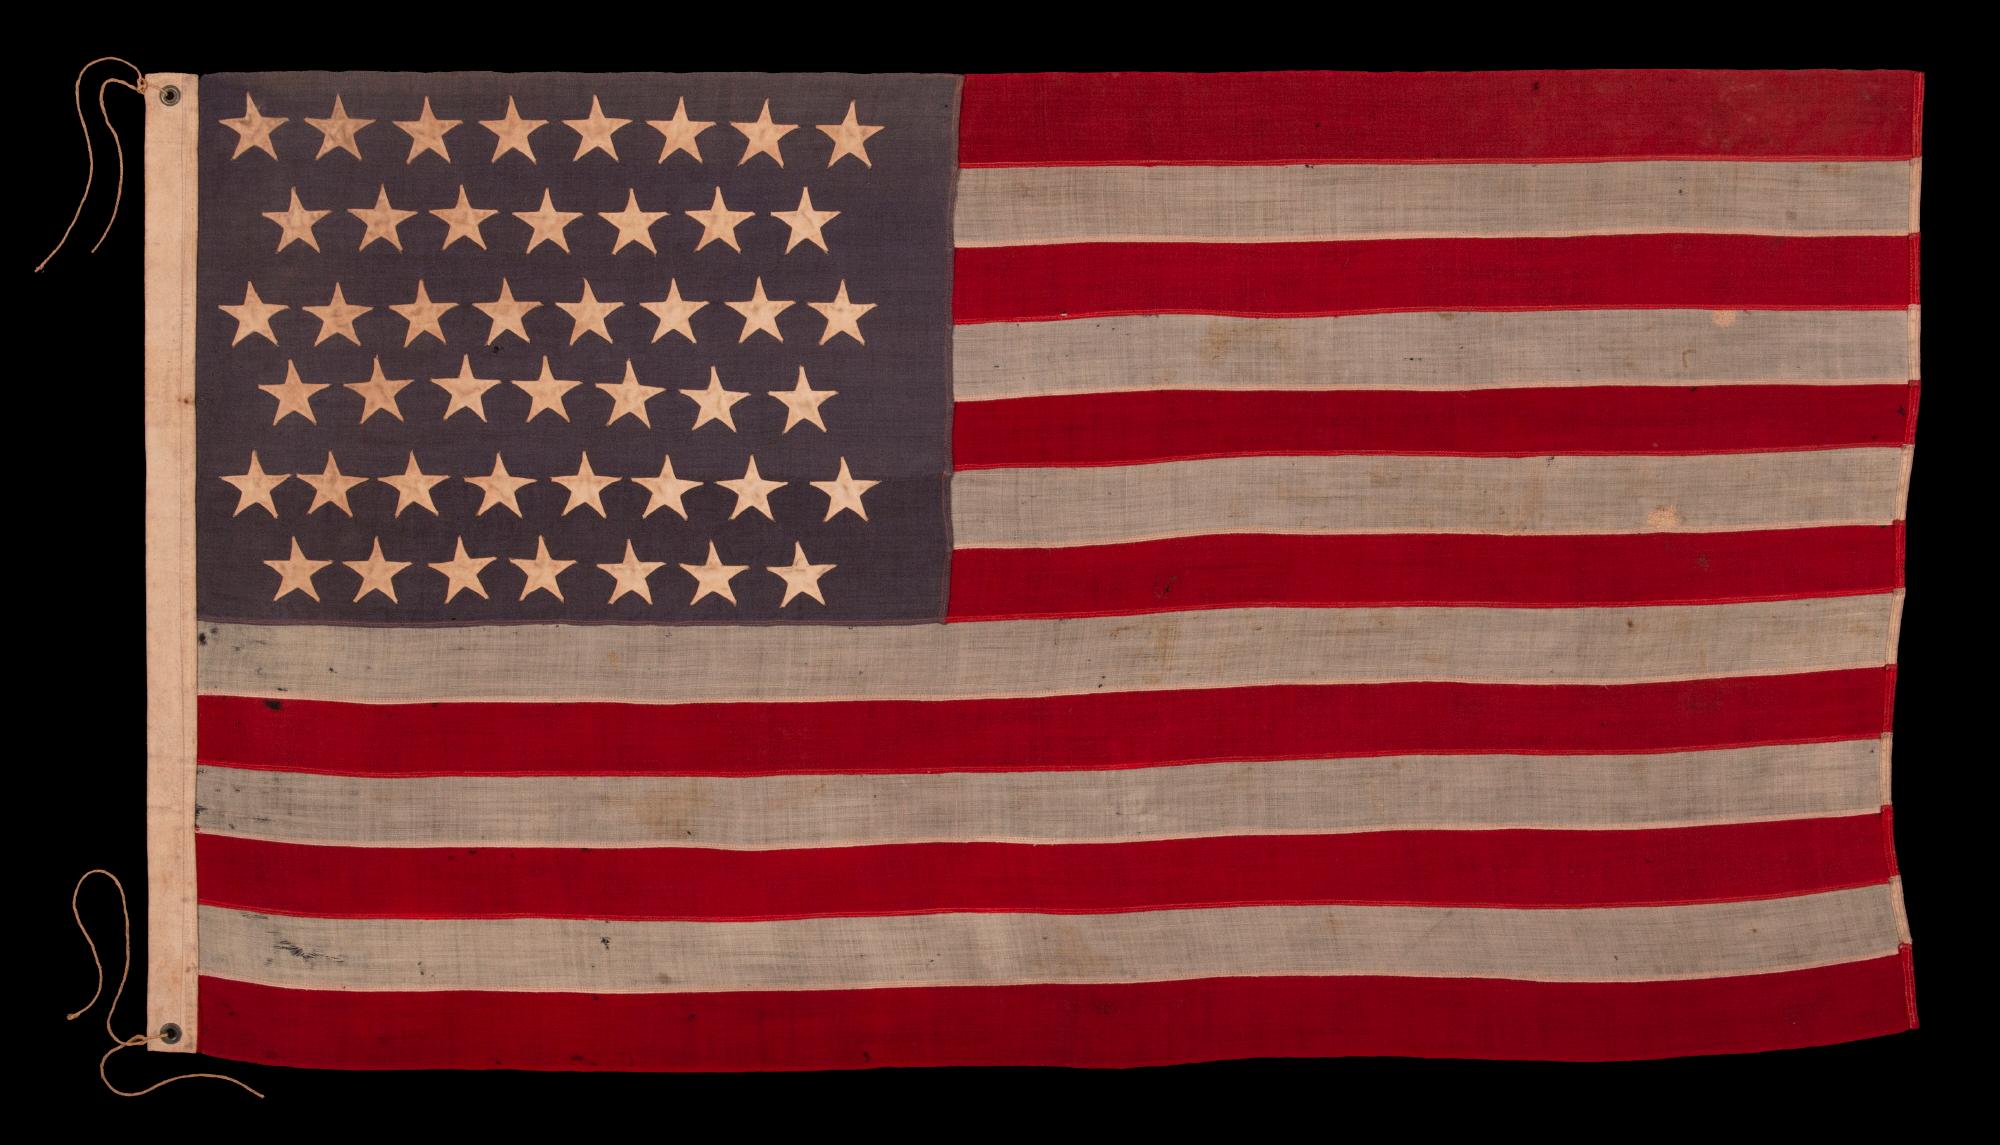 45 STAR ANTIQUE AMERICAN FLAG WITH STAGGERED ROWS OF STARS ON A DUSTY BLUE CANTON; REFLECTS THE PERIOD WHEN UTAH WAS THE MOST RECENT STATE TO JOIN THE UNION, 1890-1896

Utah became the 45th state in 1896. It had been attempting to gain statehood for